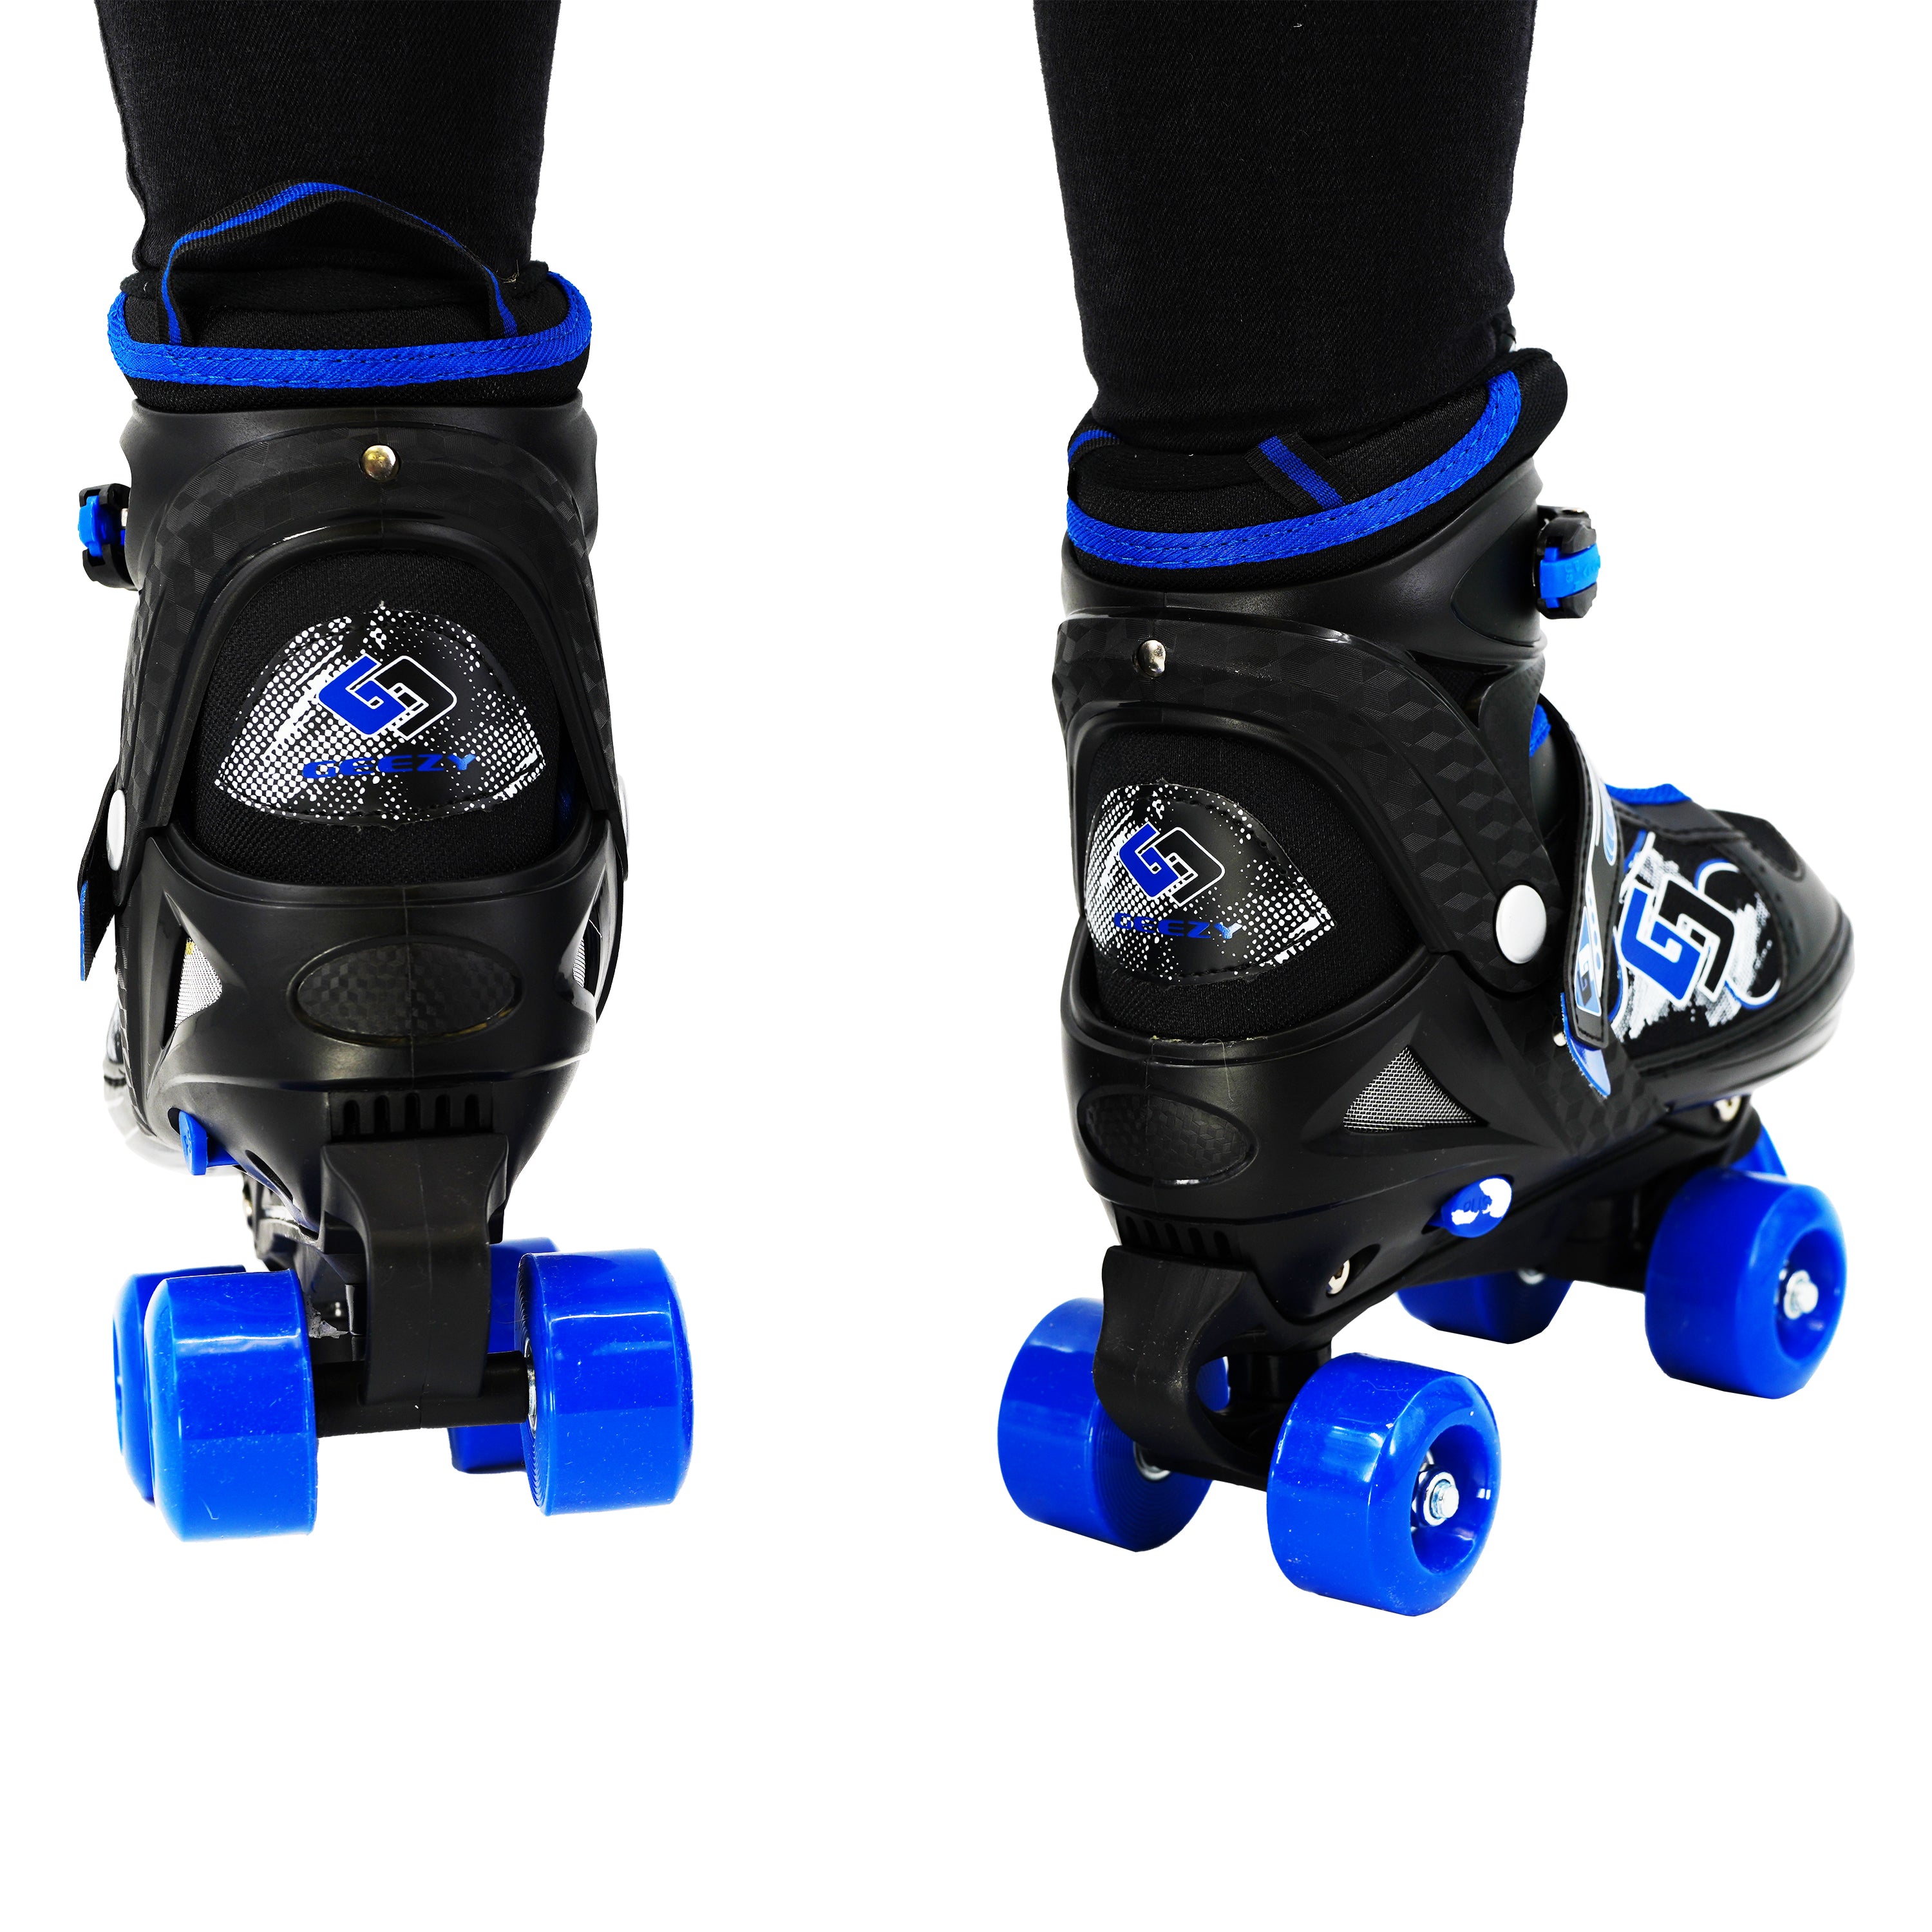 Blue and Black Roller Skates for Kids with 4 Wheel The Magic Toy Shop - The Magic Toy Shop